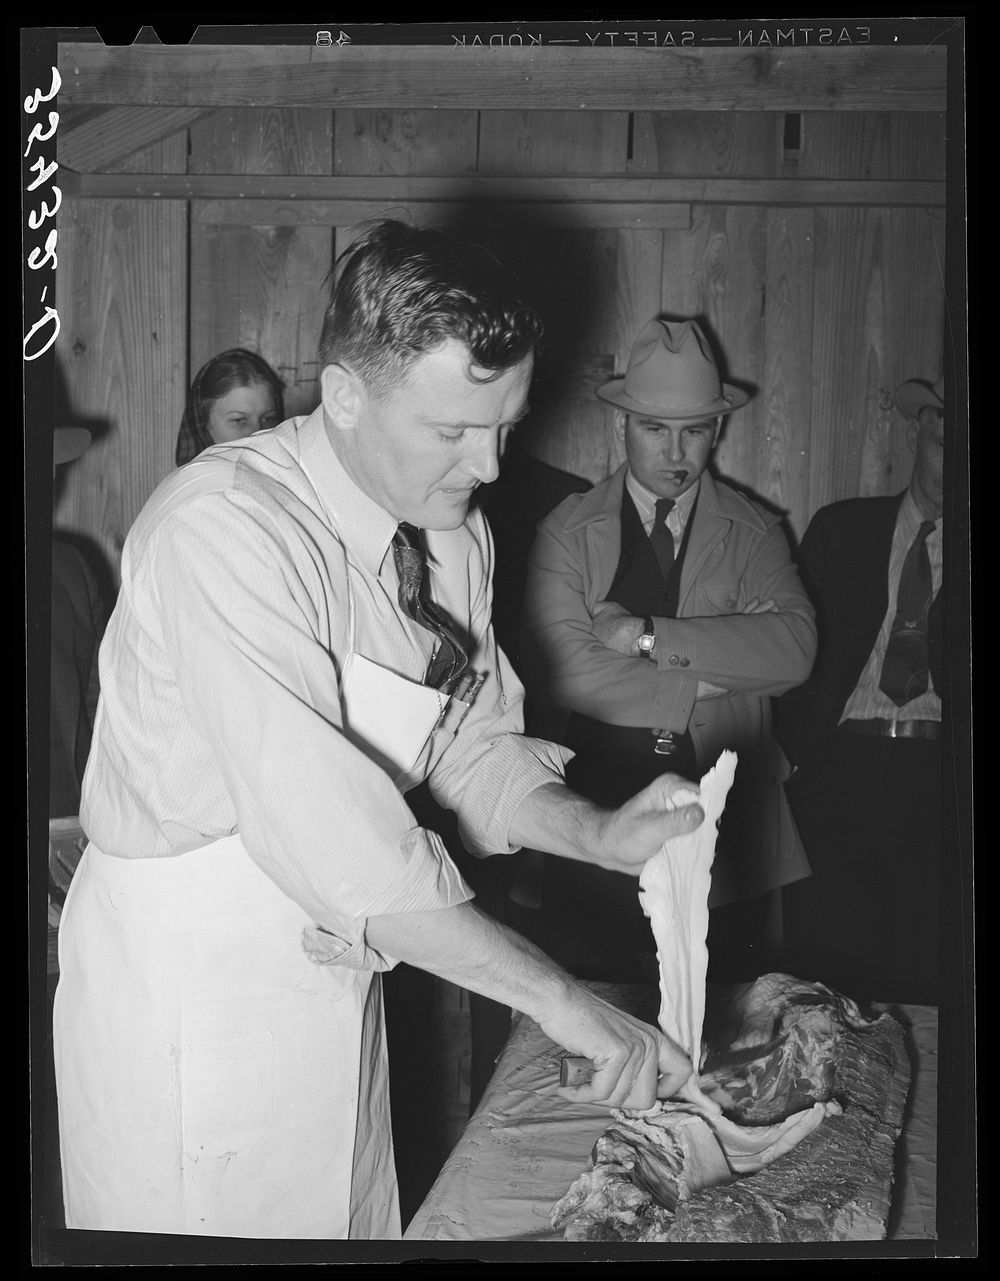 FSA (Farm Security Administration) supervisor who was formerly a meat cutter in a large packing plant giving an exhibition…